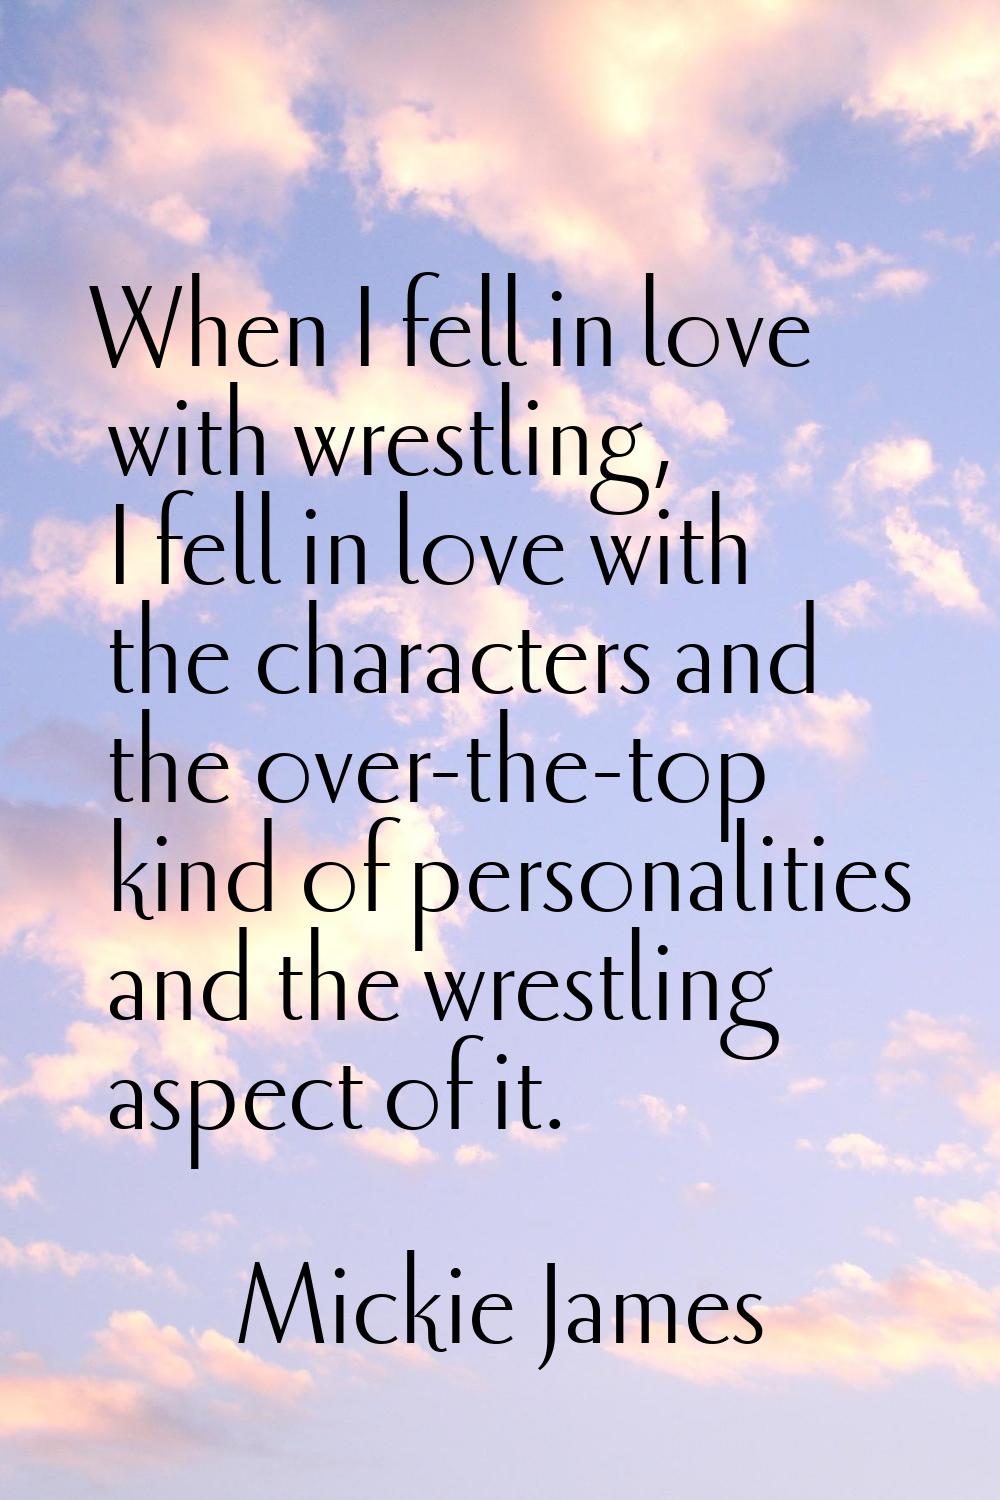 When I fell in love with wrestling, I fell in love with the characters and the over-the-top kind of